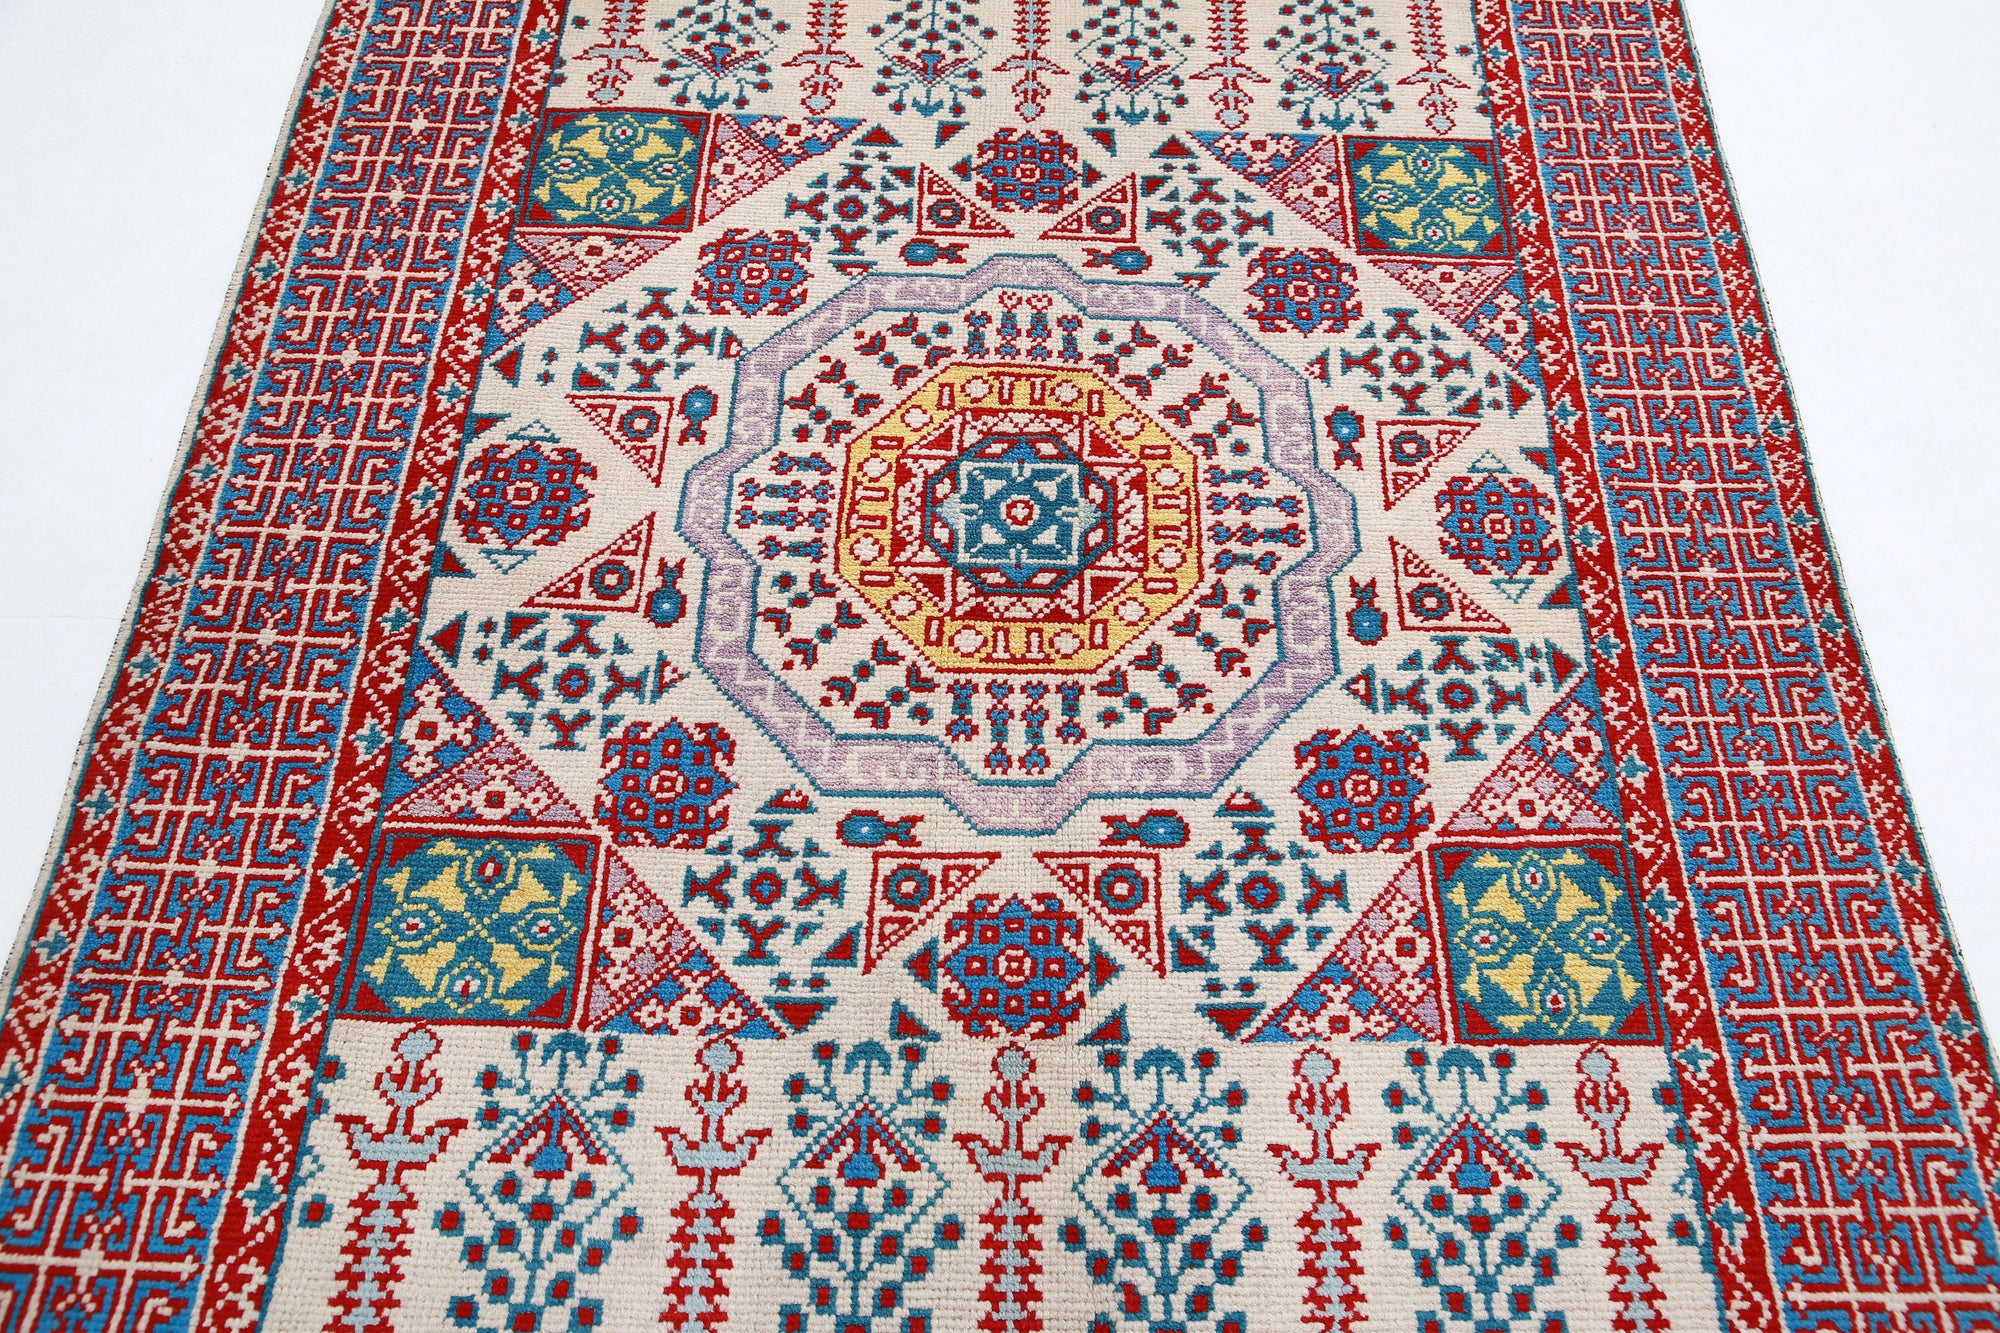 Revival-hand-knotted-qarghani-wool-rug-5014096-4.jpg